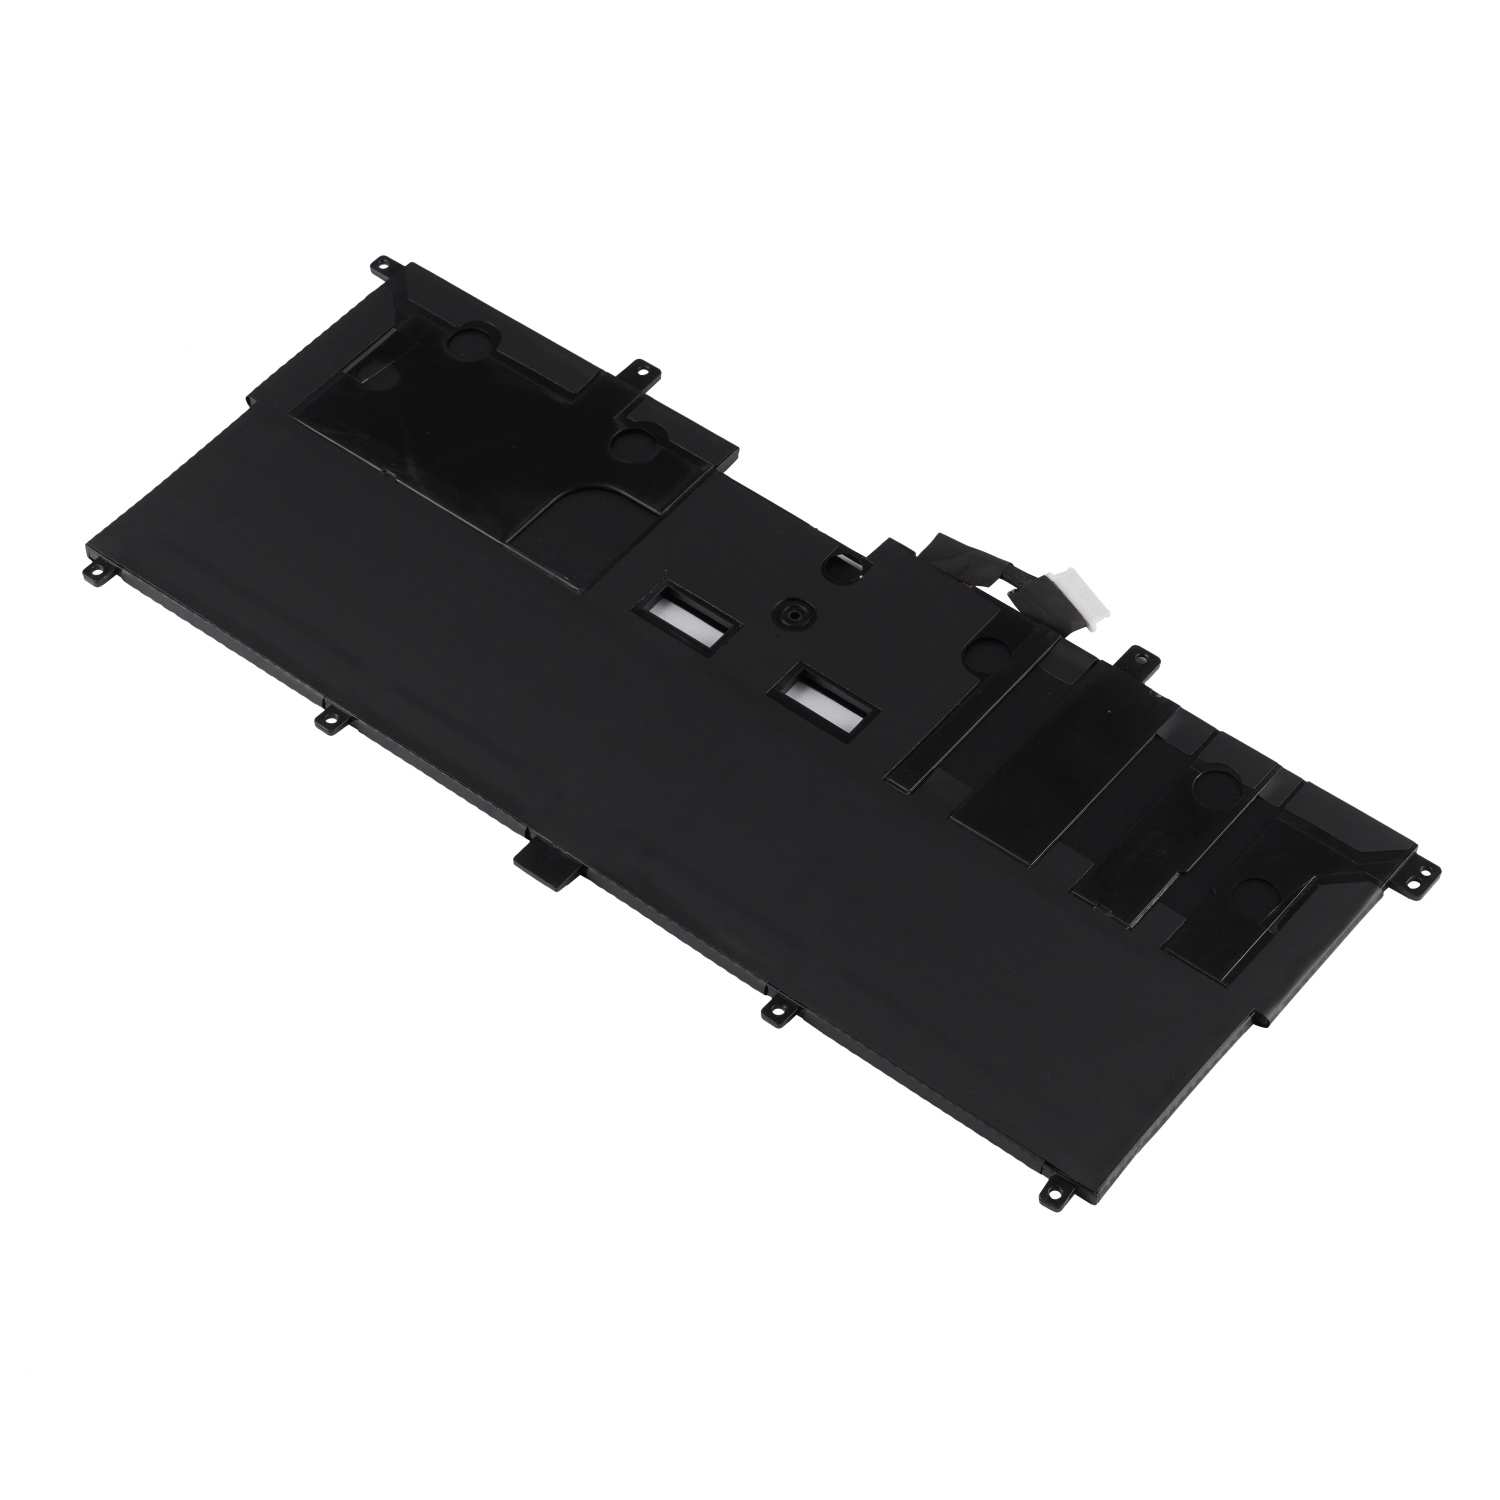 NNF1C HMPFH Battery for Dell XPS 13 9365 Series, XPS 13-9365-D1605TS 13-9365-D1805TS 13-9365-D2805TS 13-9365-D3605TS Laptop